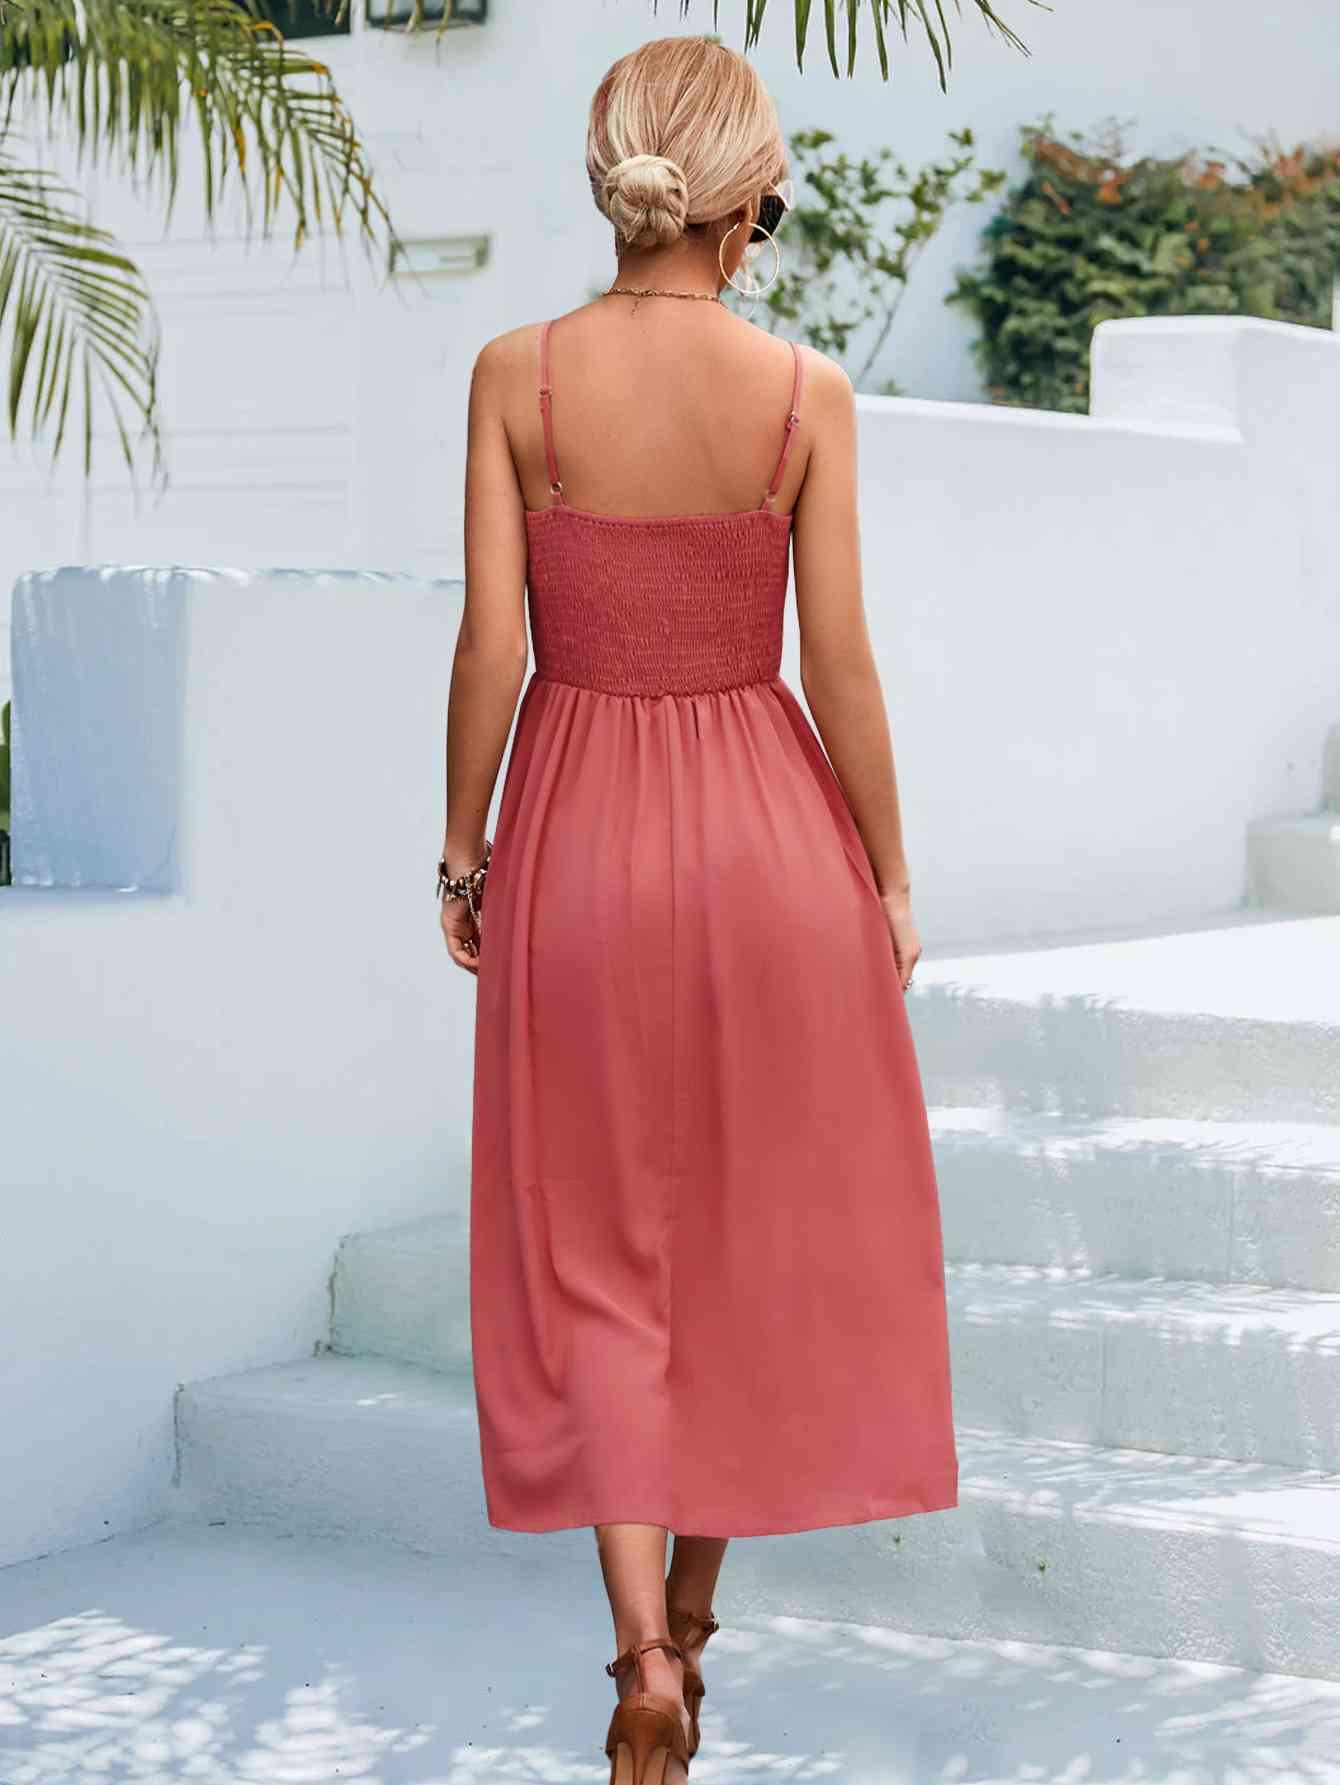 a woman in a pink dress walking down some steps